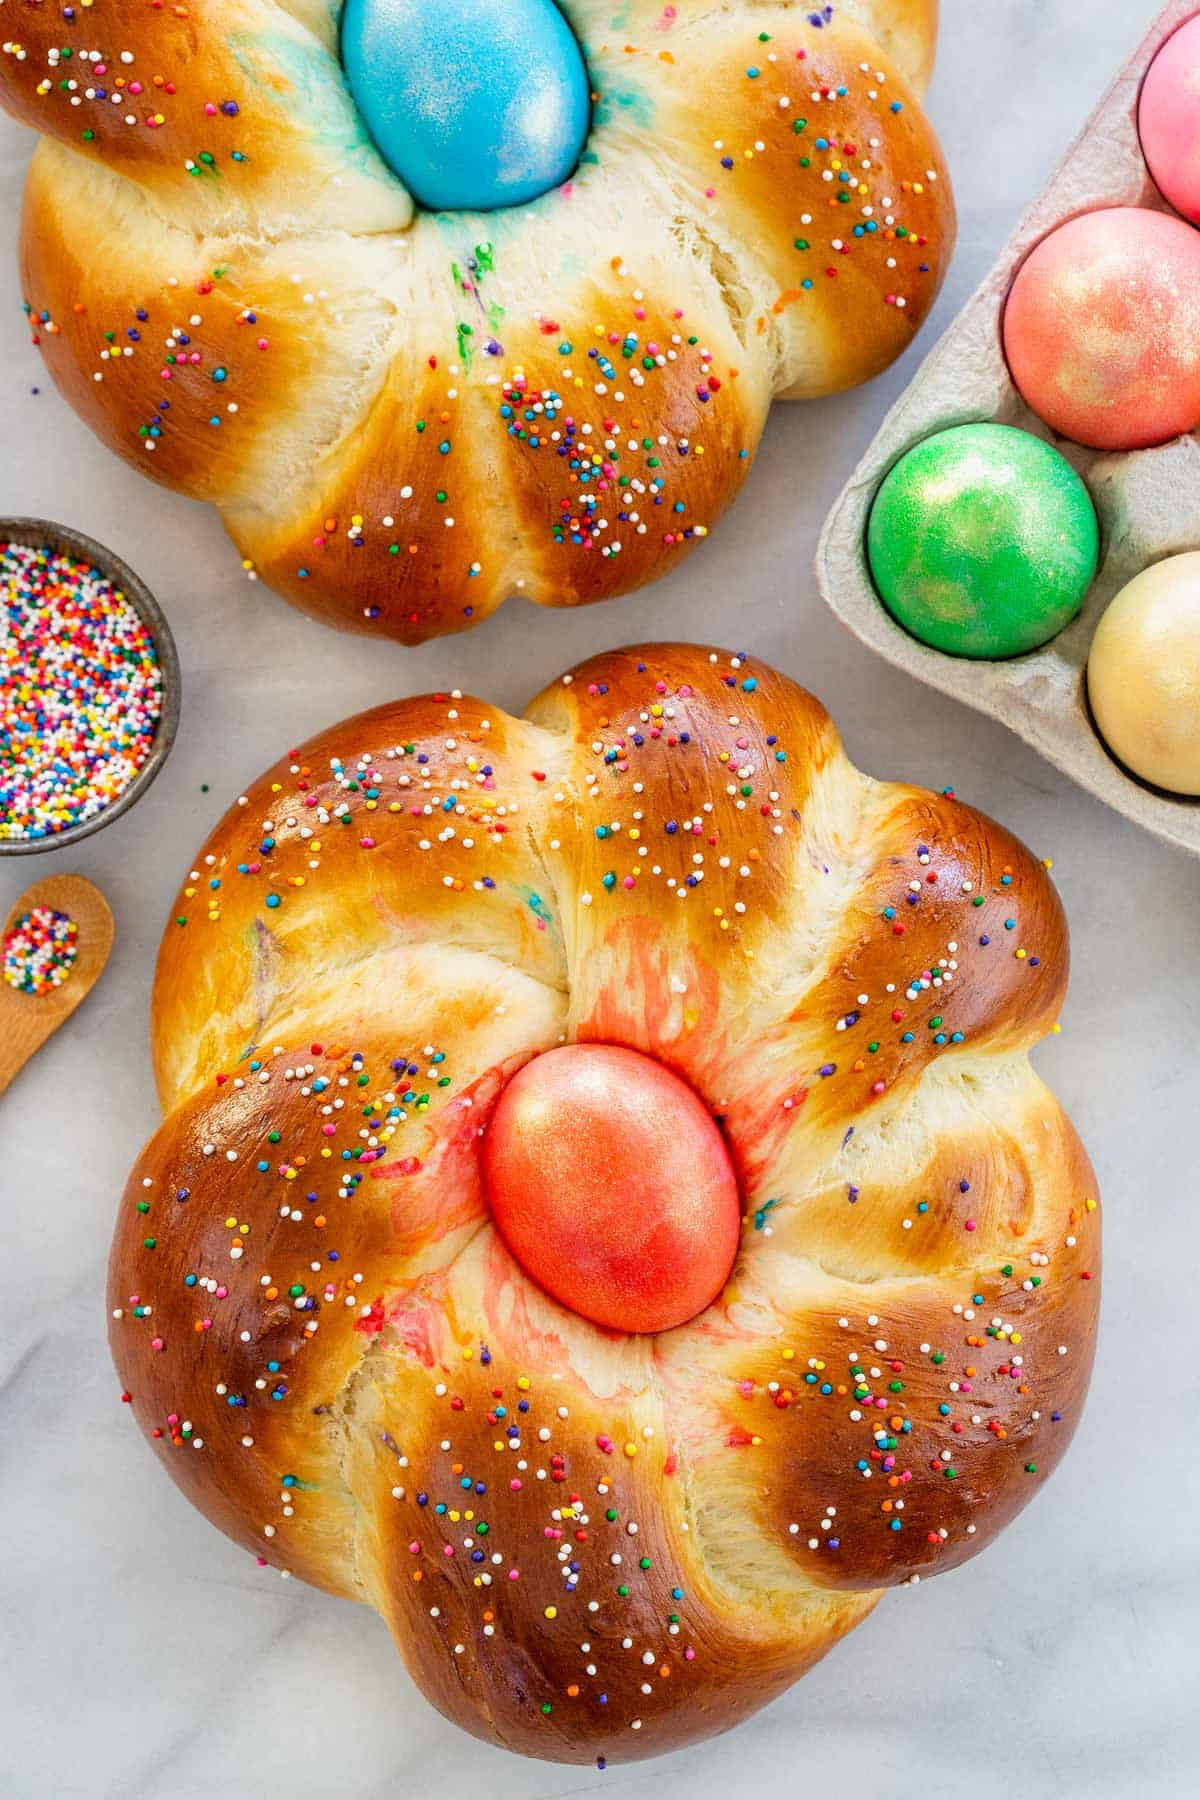 Authentic Italian Easter Bread Recipe Awesome Italian Easter Bread Recipe Jessica Gavin